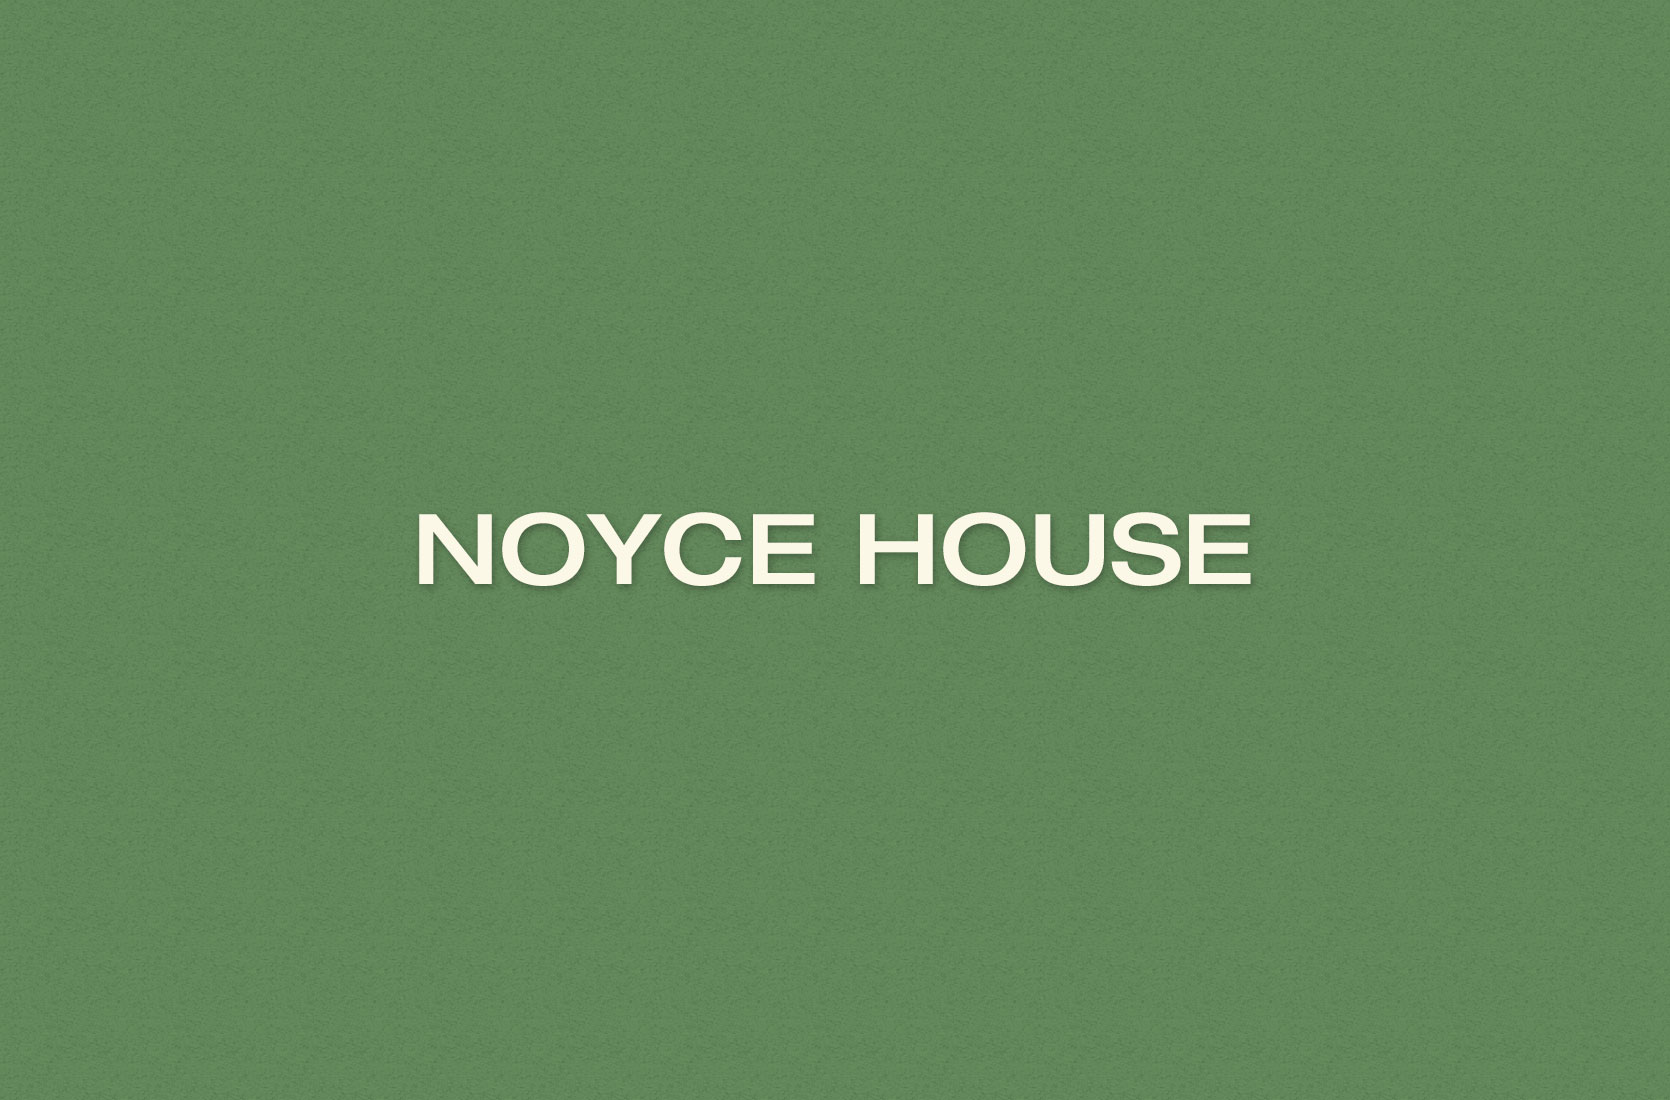 Noyce guest house place card